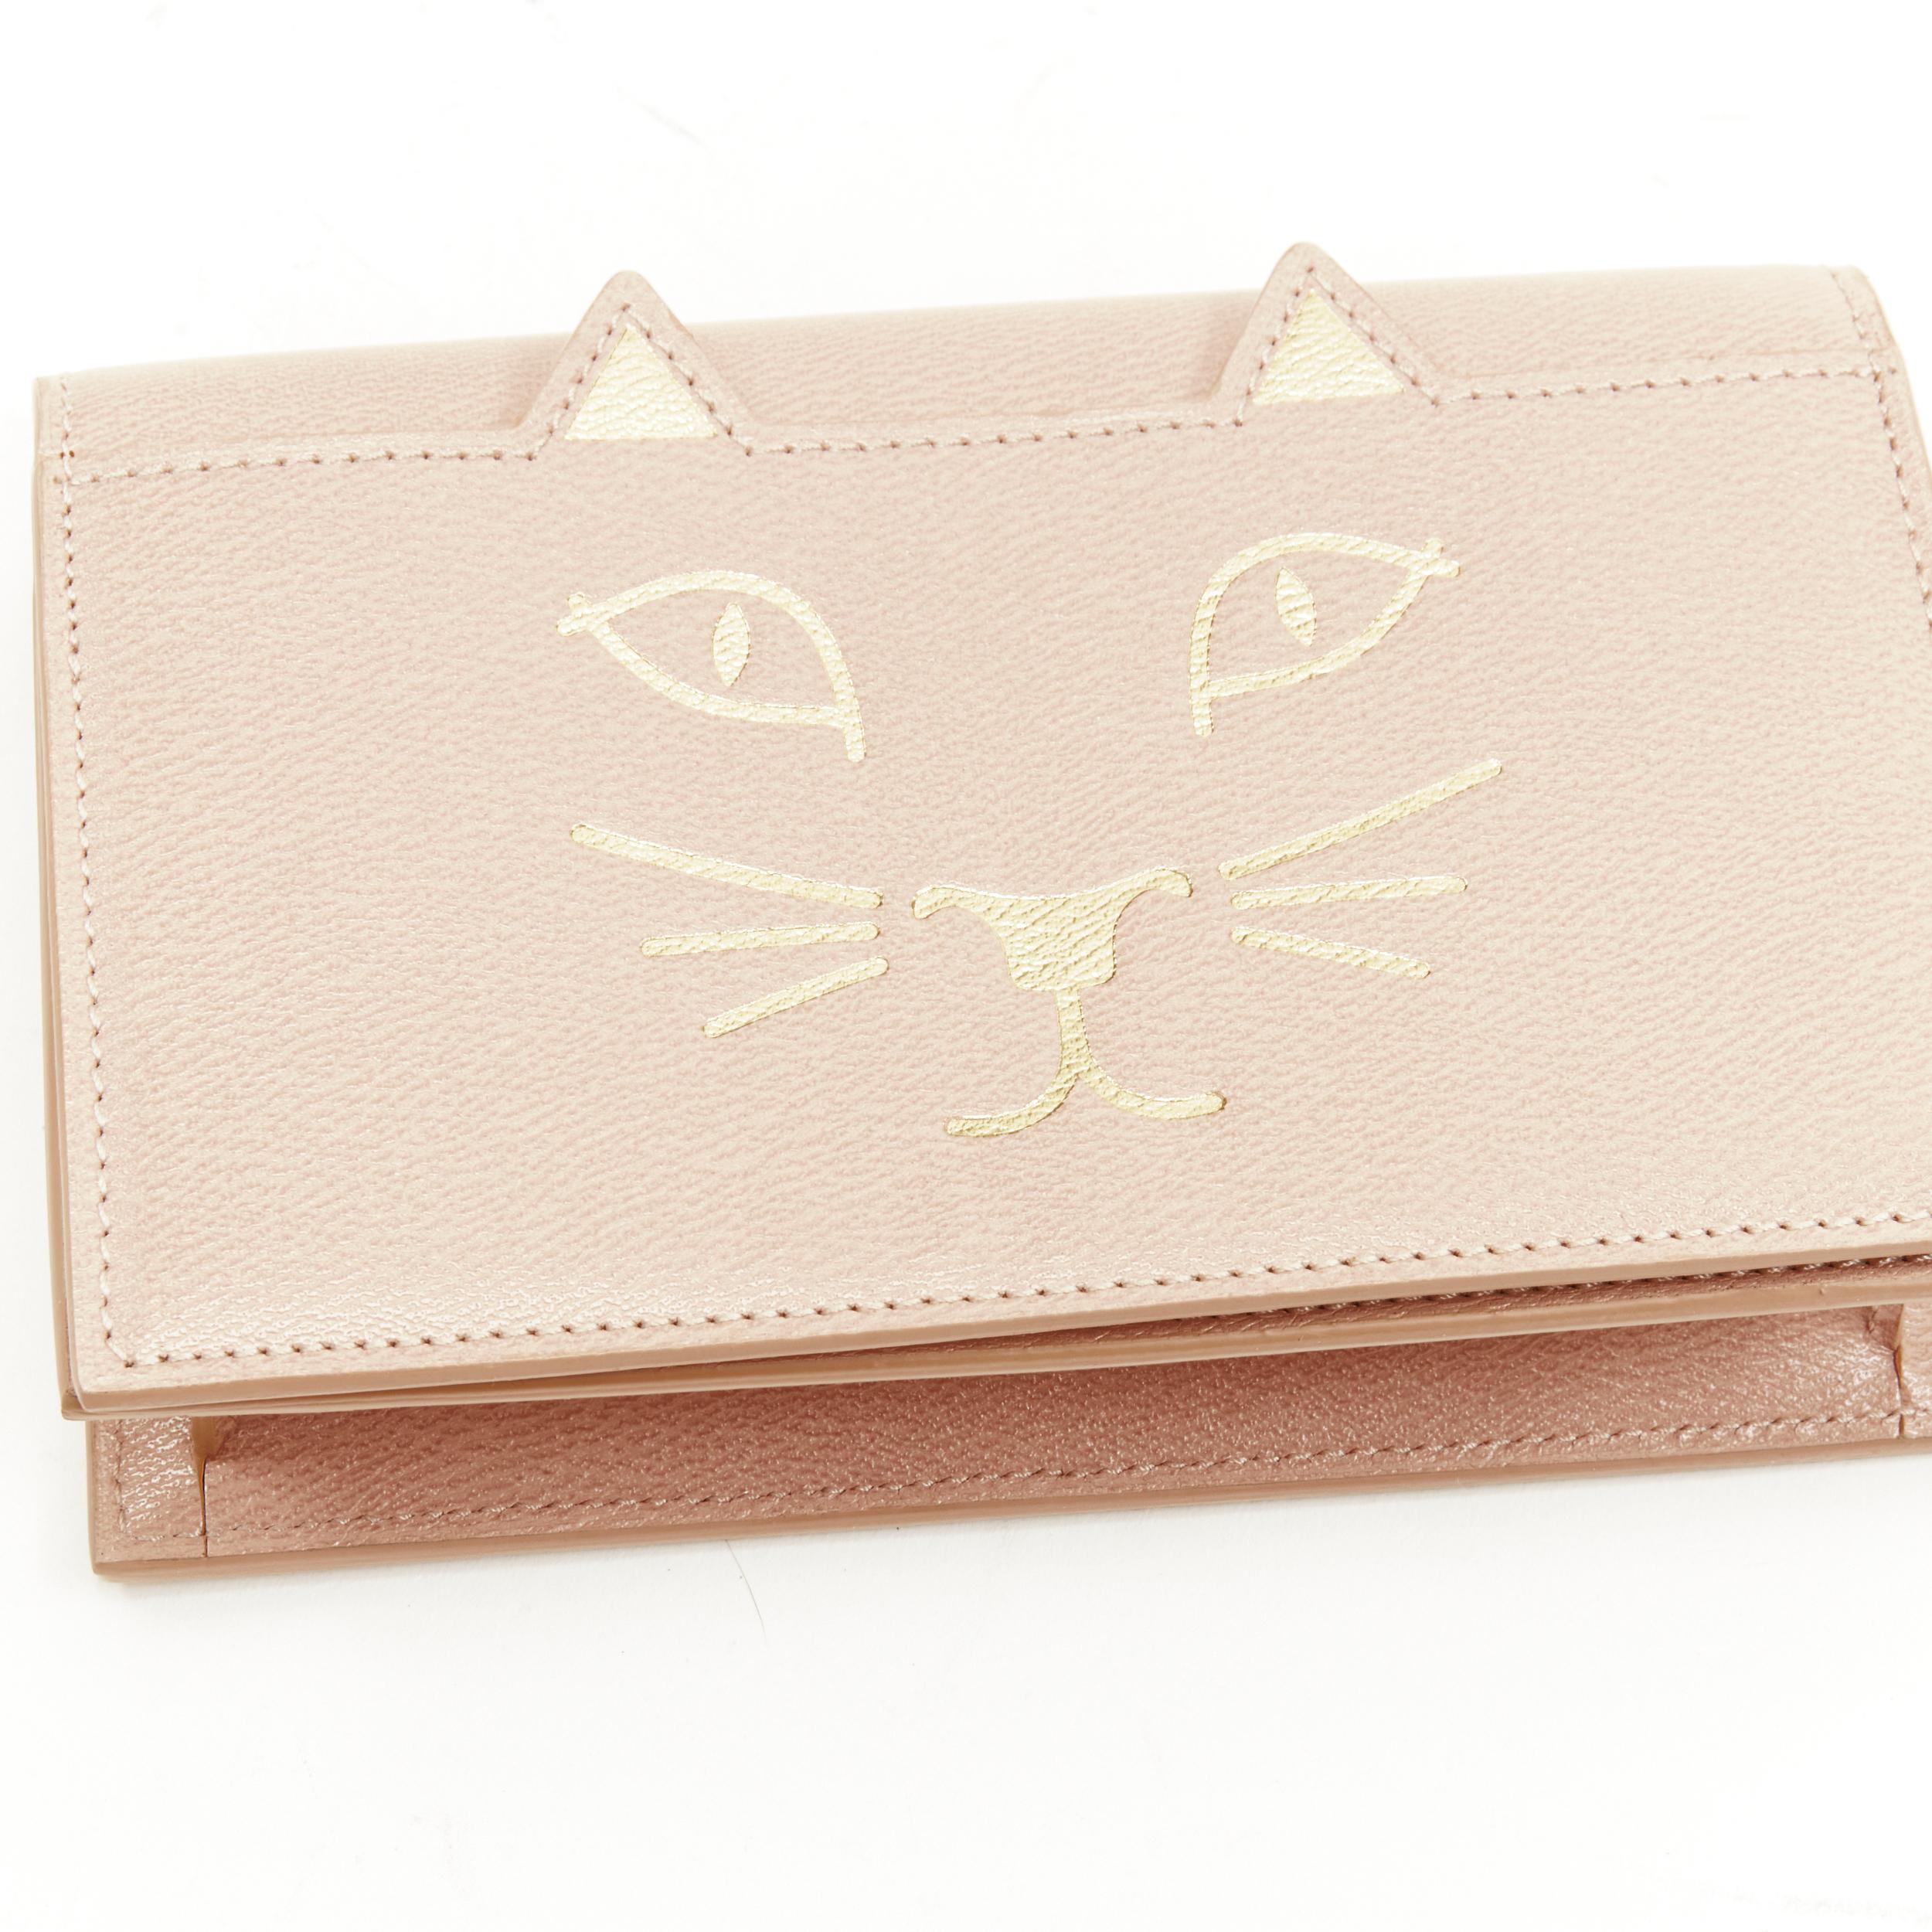 CHARLOTTE OLYMPIA Kitty blush nude gold cat face print leather crossbody bag 1